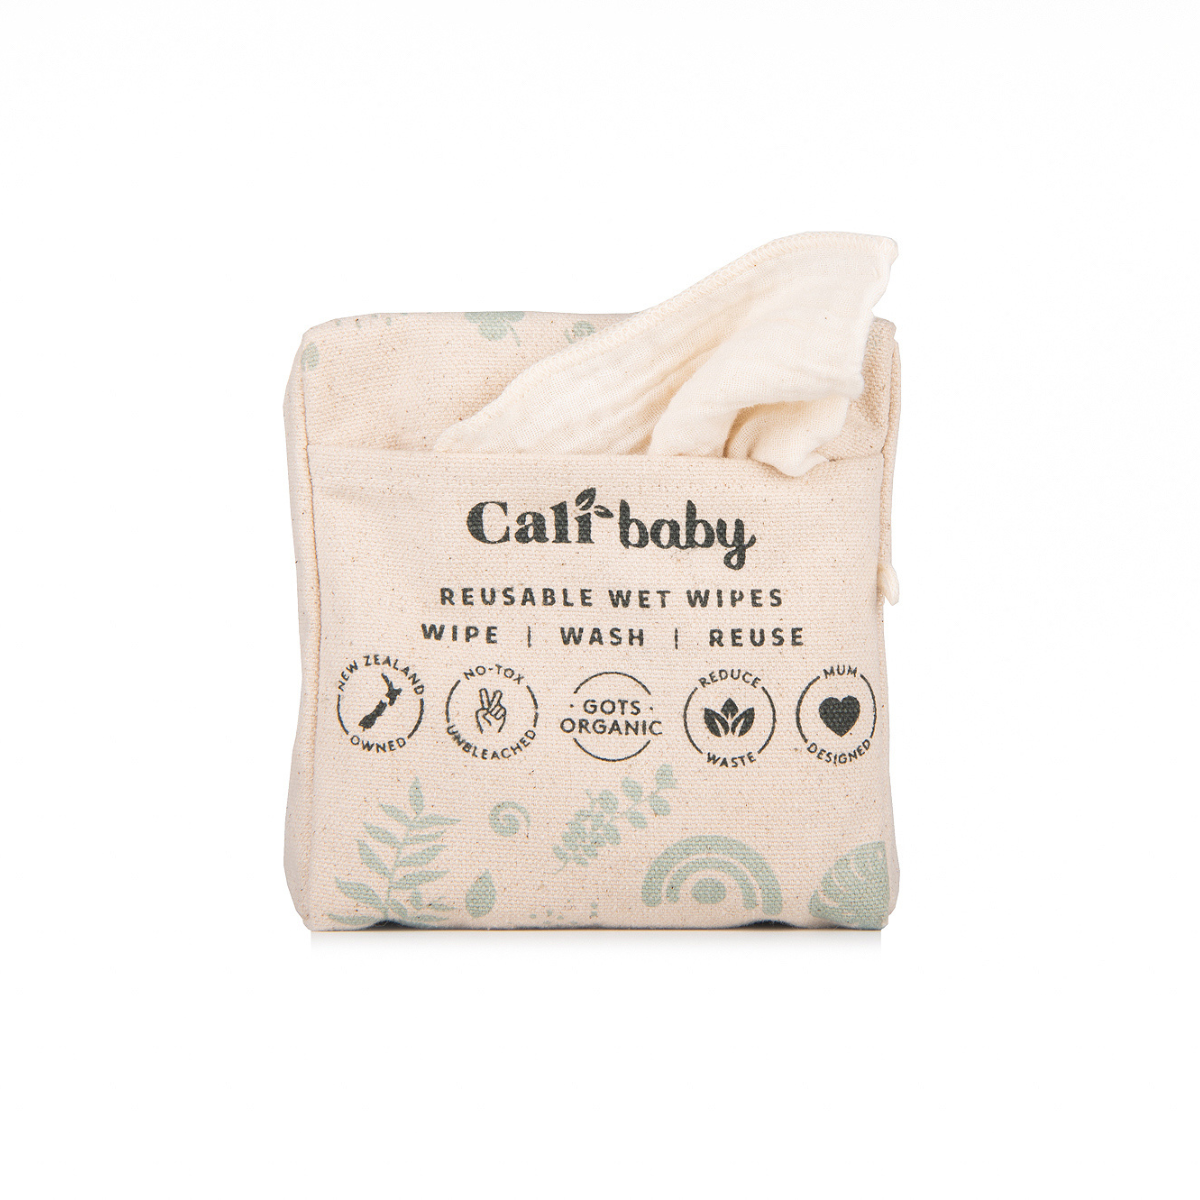 CaliBaby Reusable Wet Wipe are a zero-waste staple for eco-conscious parents and the perfect companion for early potty training.